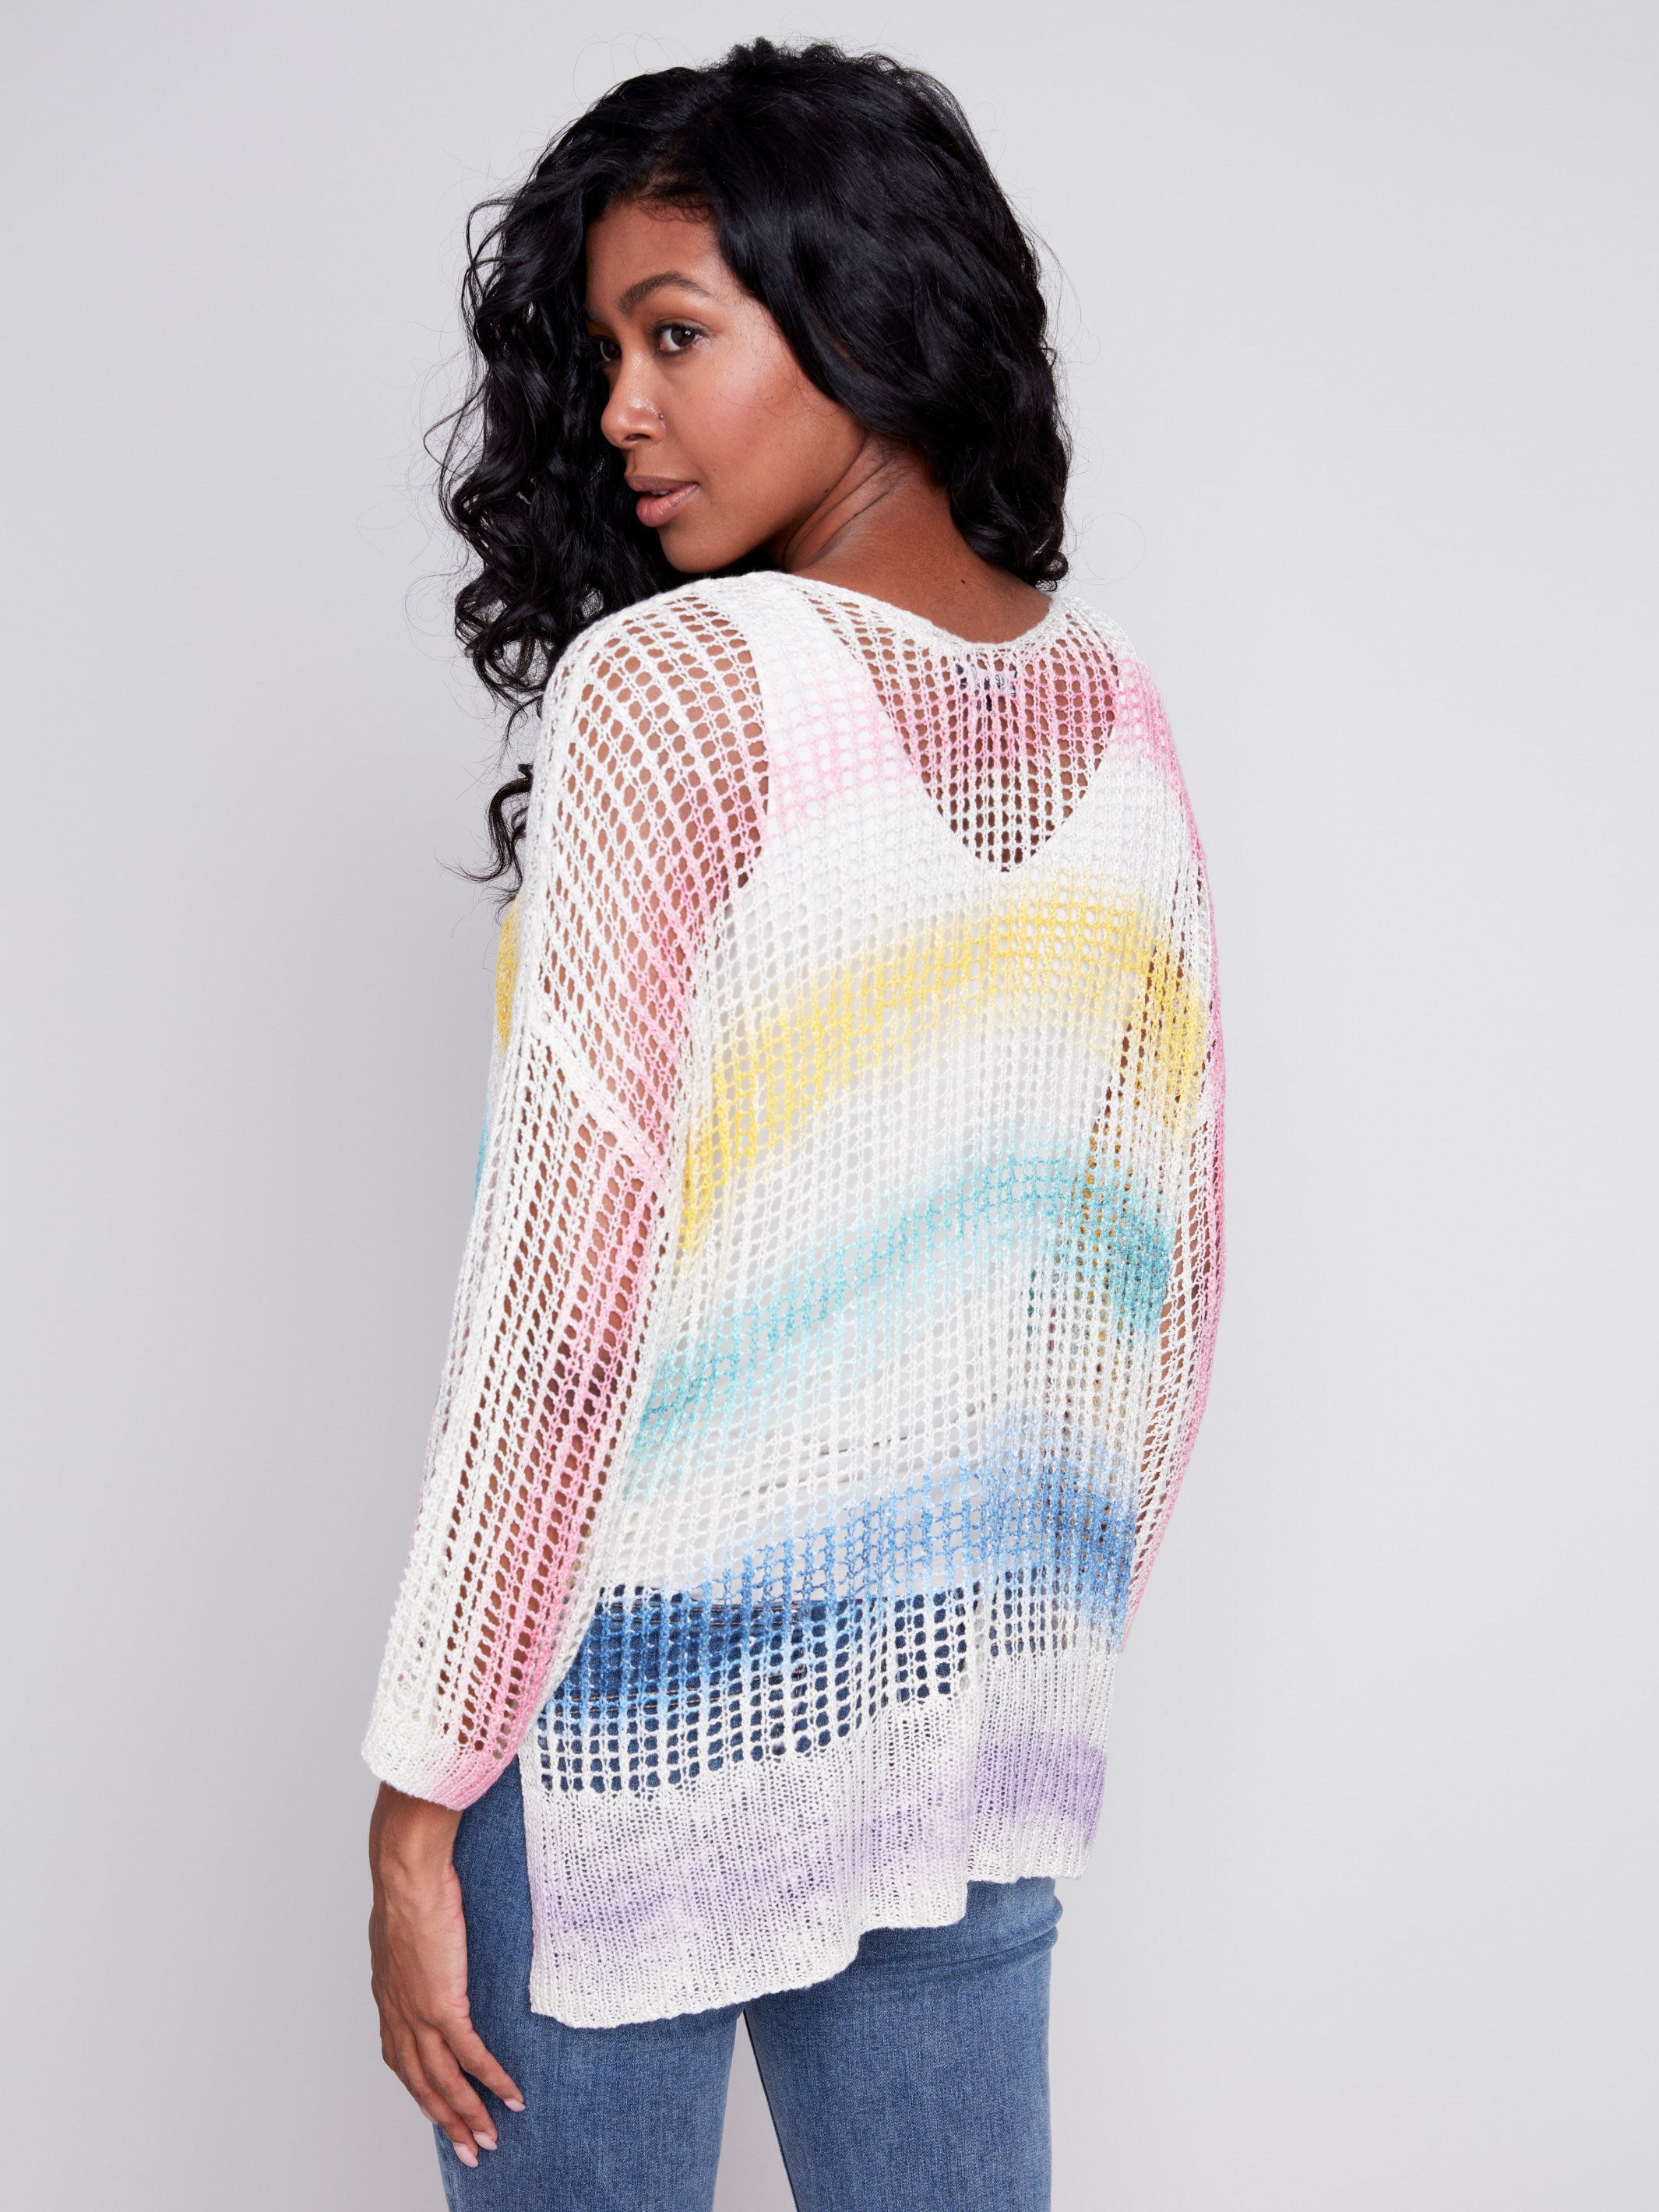 Printed Fishnet Crochet Sweater - Rainbow - Charlie B Collection Canada - Image 2